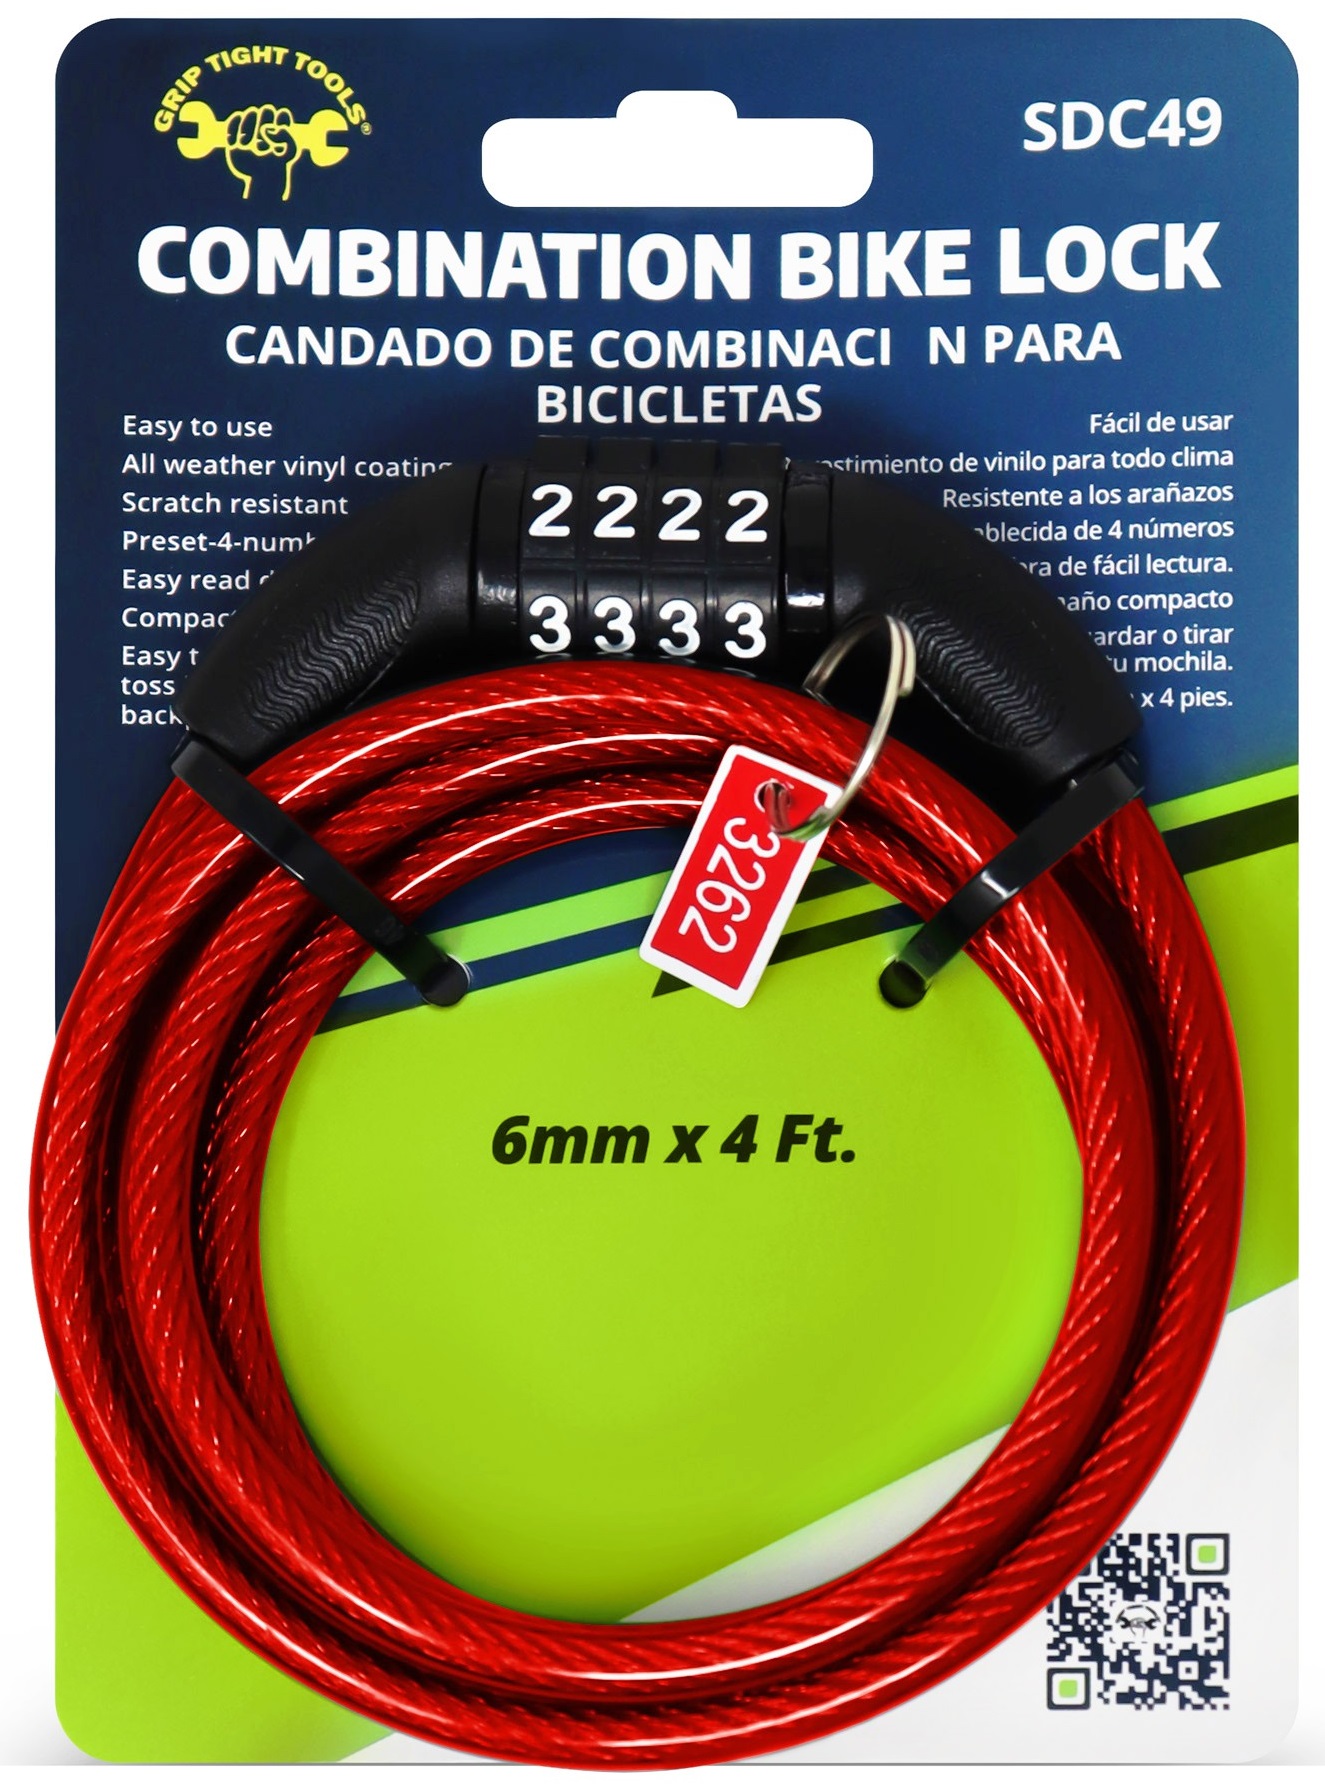 SDC49-Red-4-ft.-X-6mm-Self-Coiling-Cable-Combination-Bike-Lock